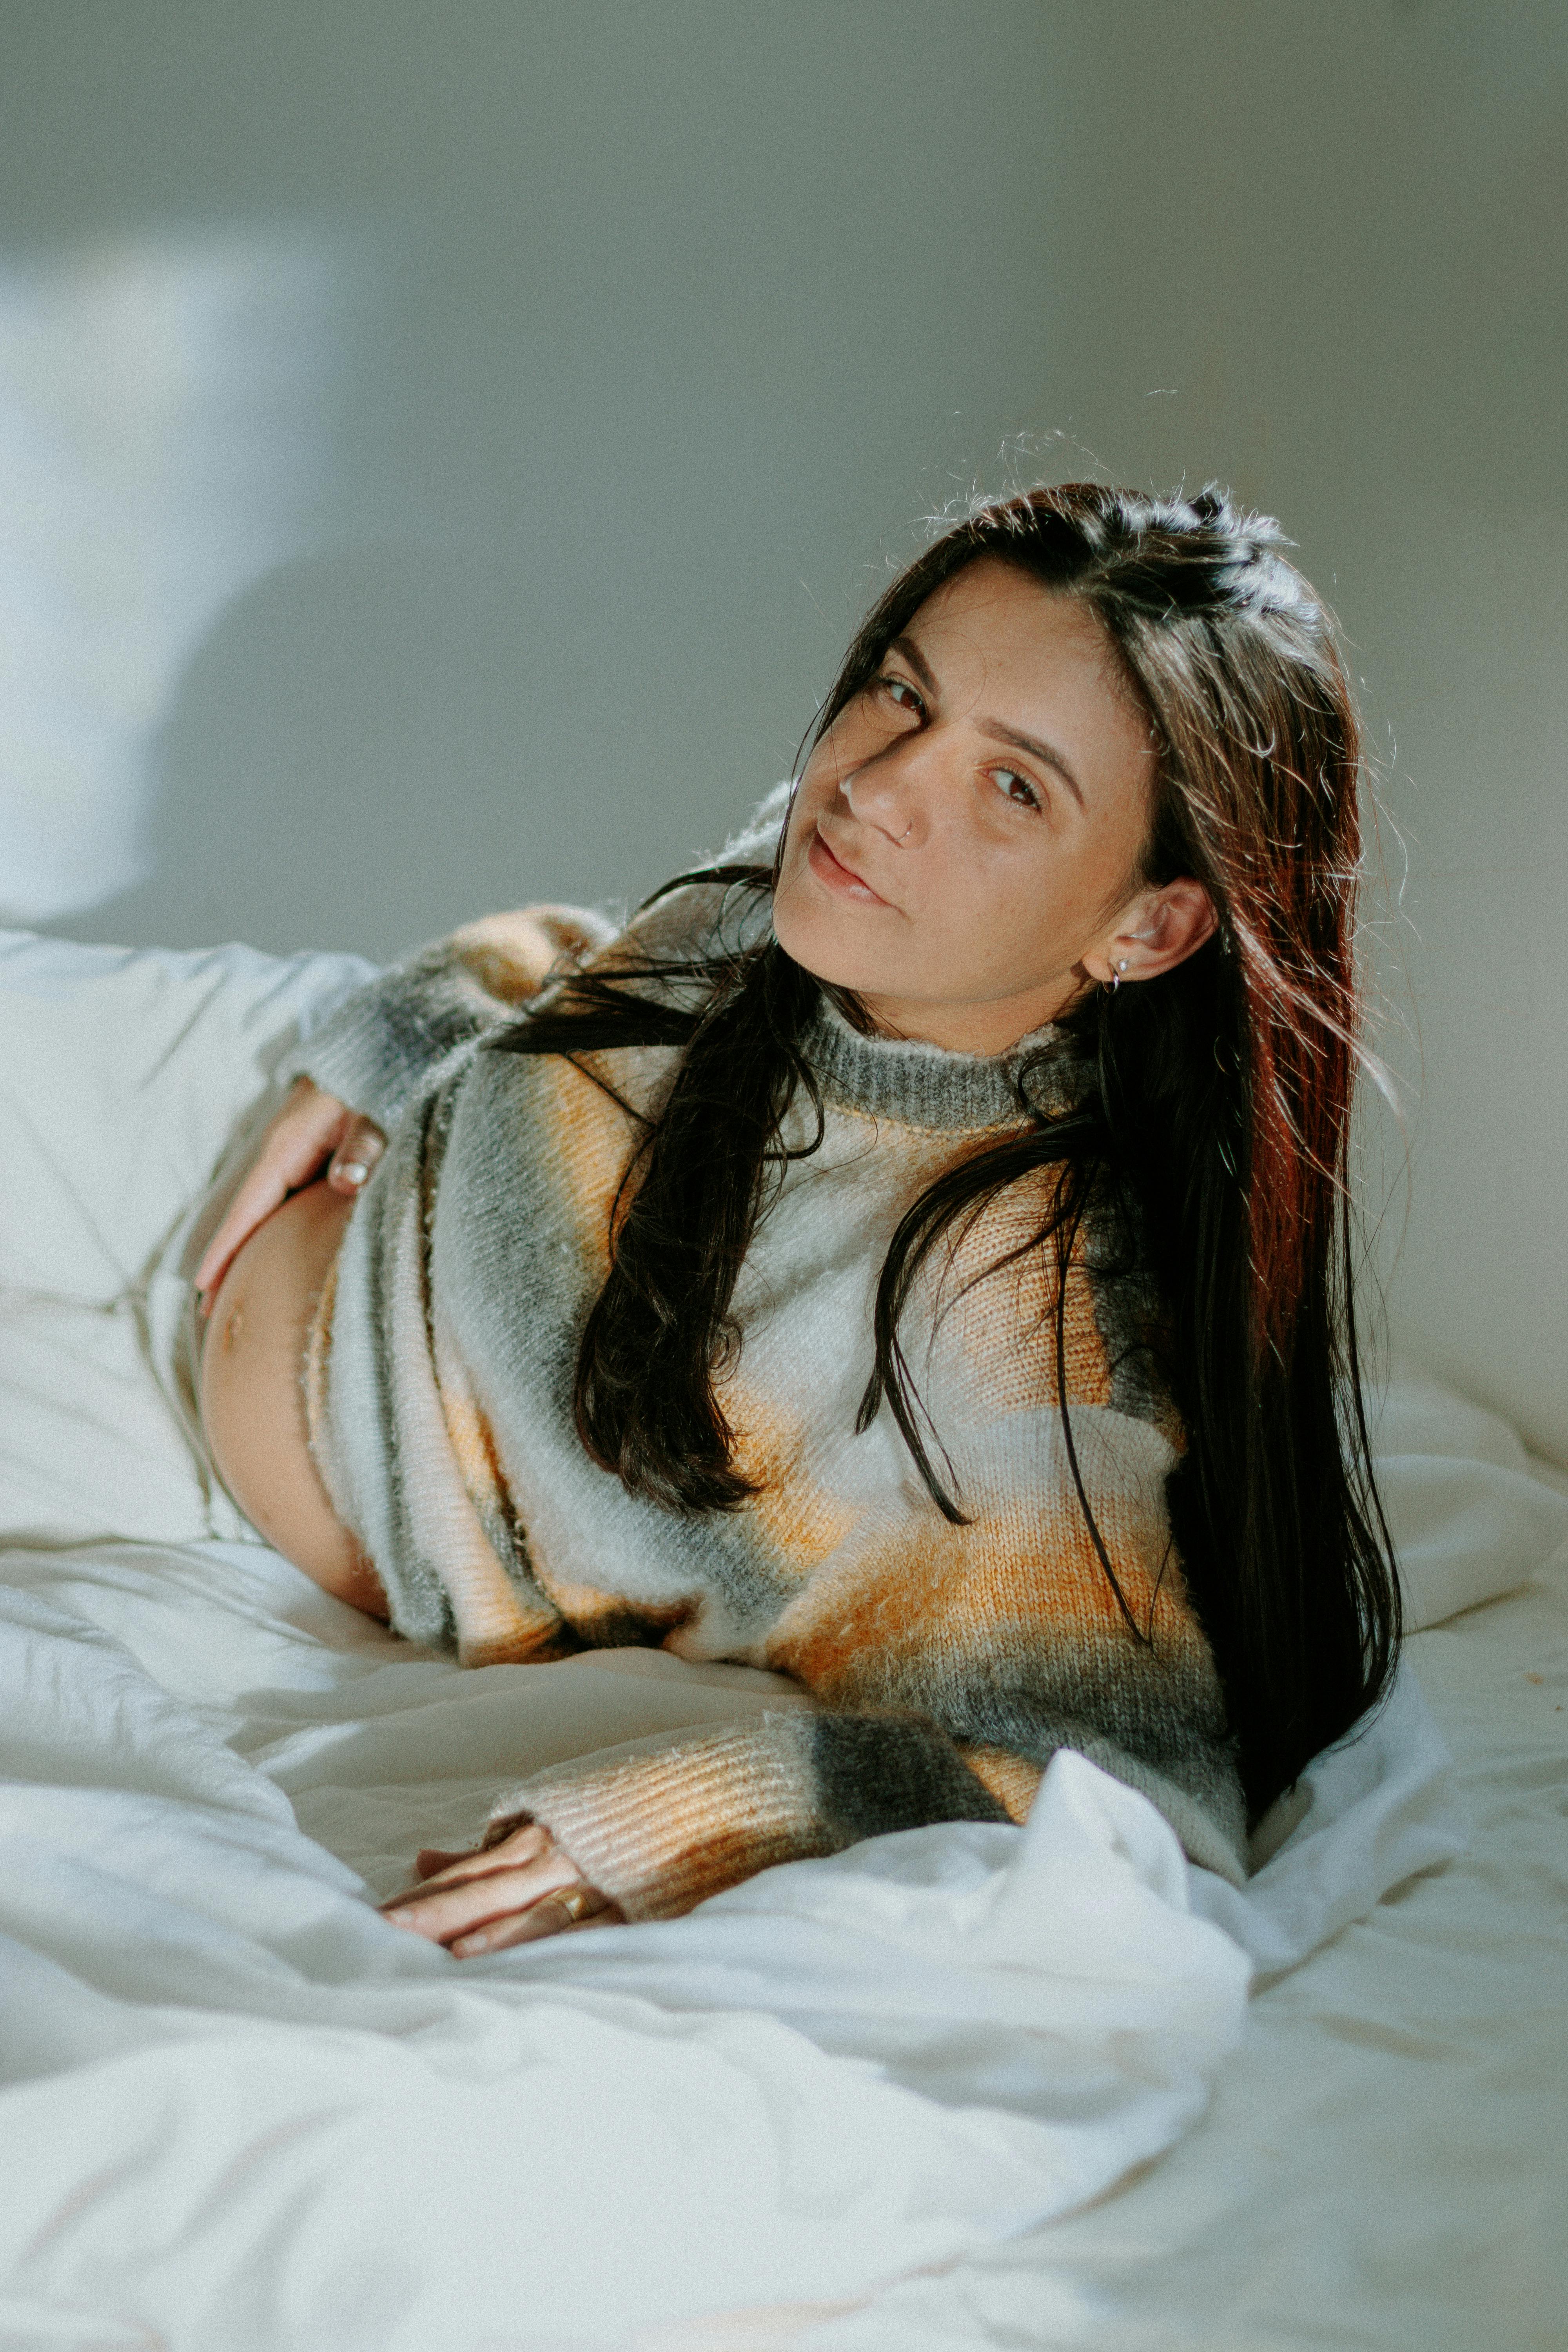 A pregnant woman looking displeased while lying on a bed | Source: Pexels